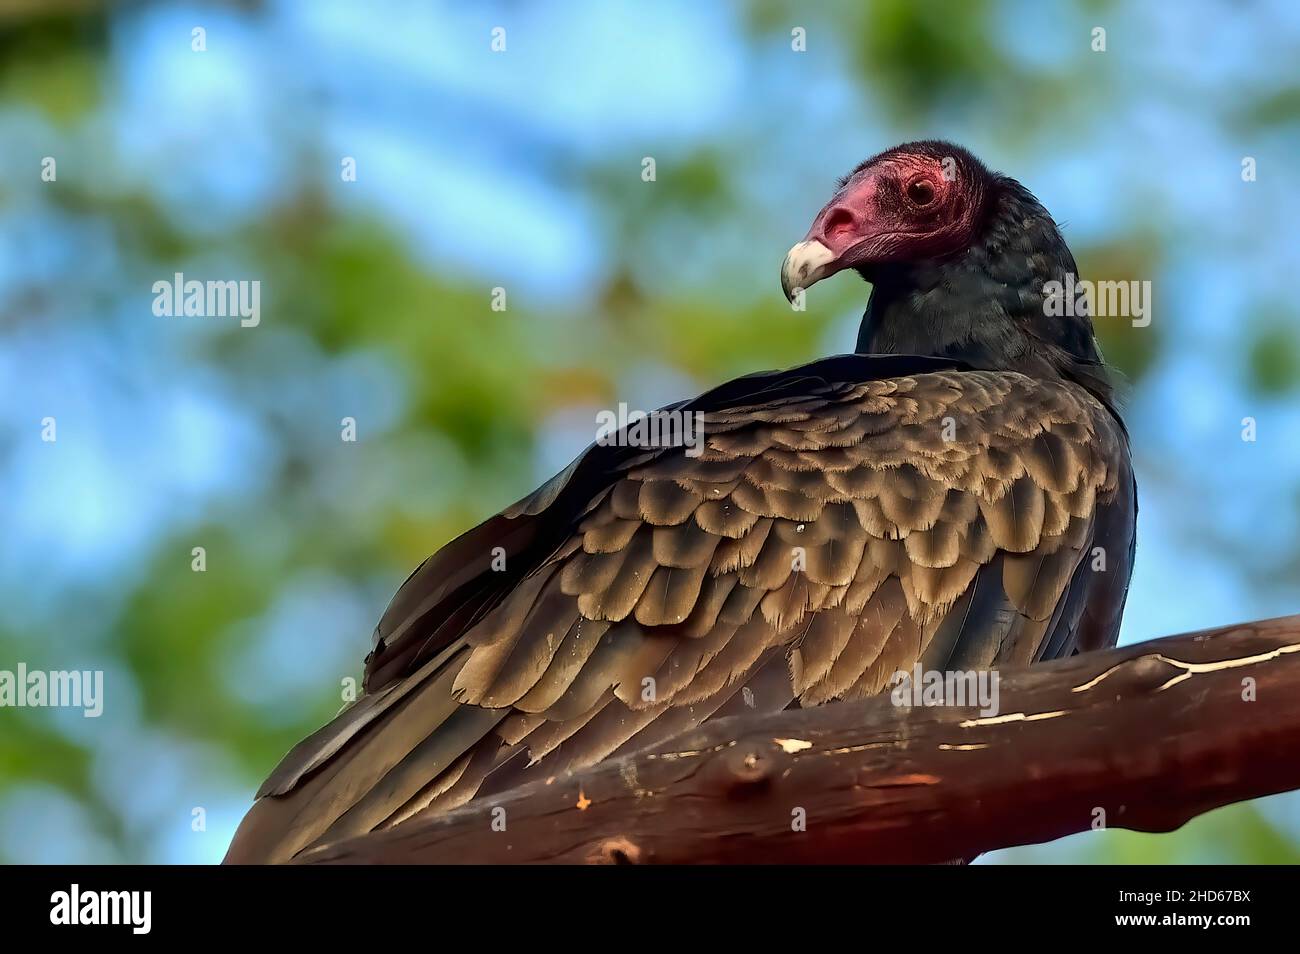 A close up portrait image of a wild Turkey Vulture 'Cathartes aura', perched on a tree branch on the coast of Vancouver Island in British Columbia Can Stock Photo